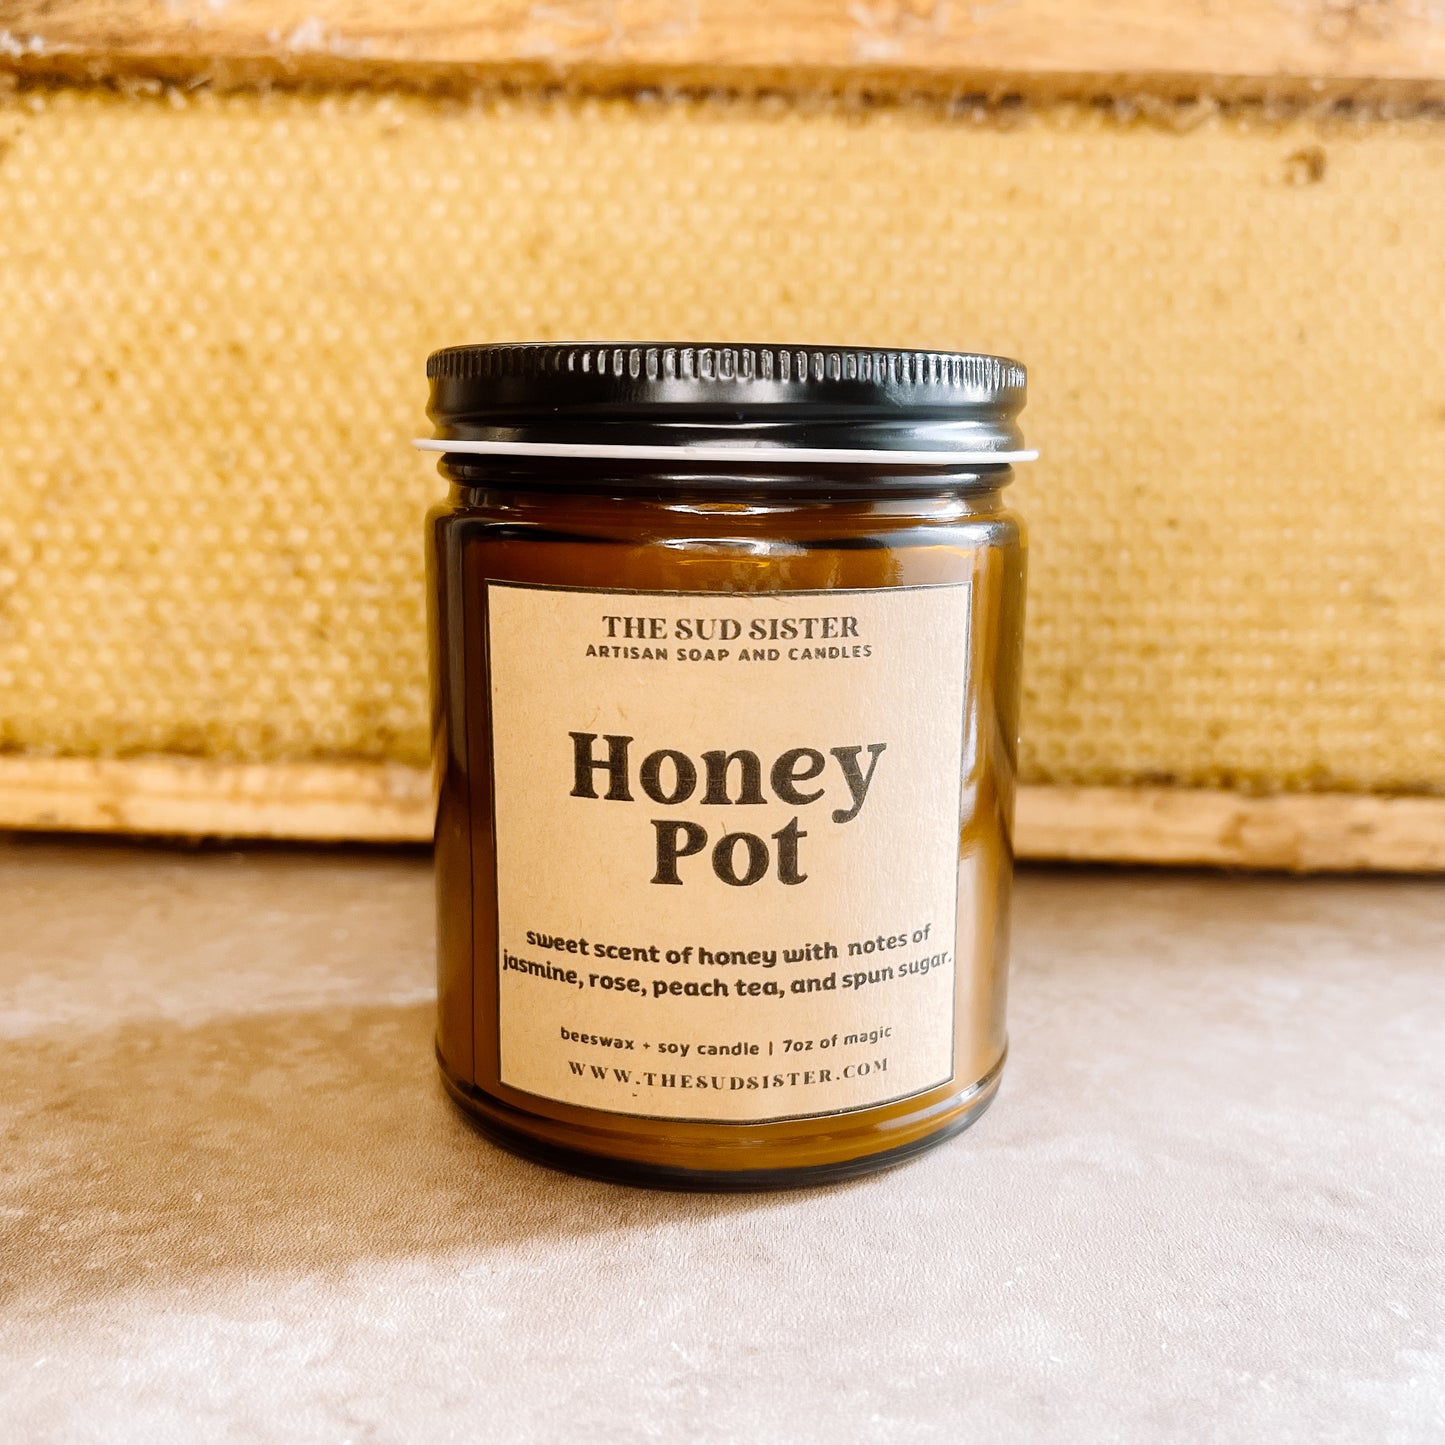 Honey Pot | beeswax + soy candle